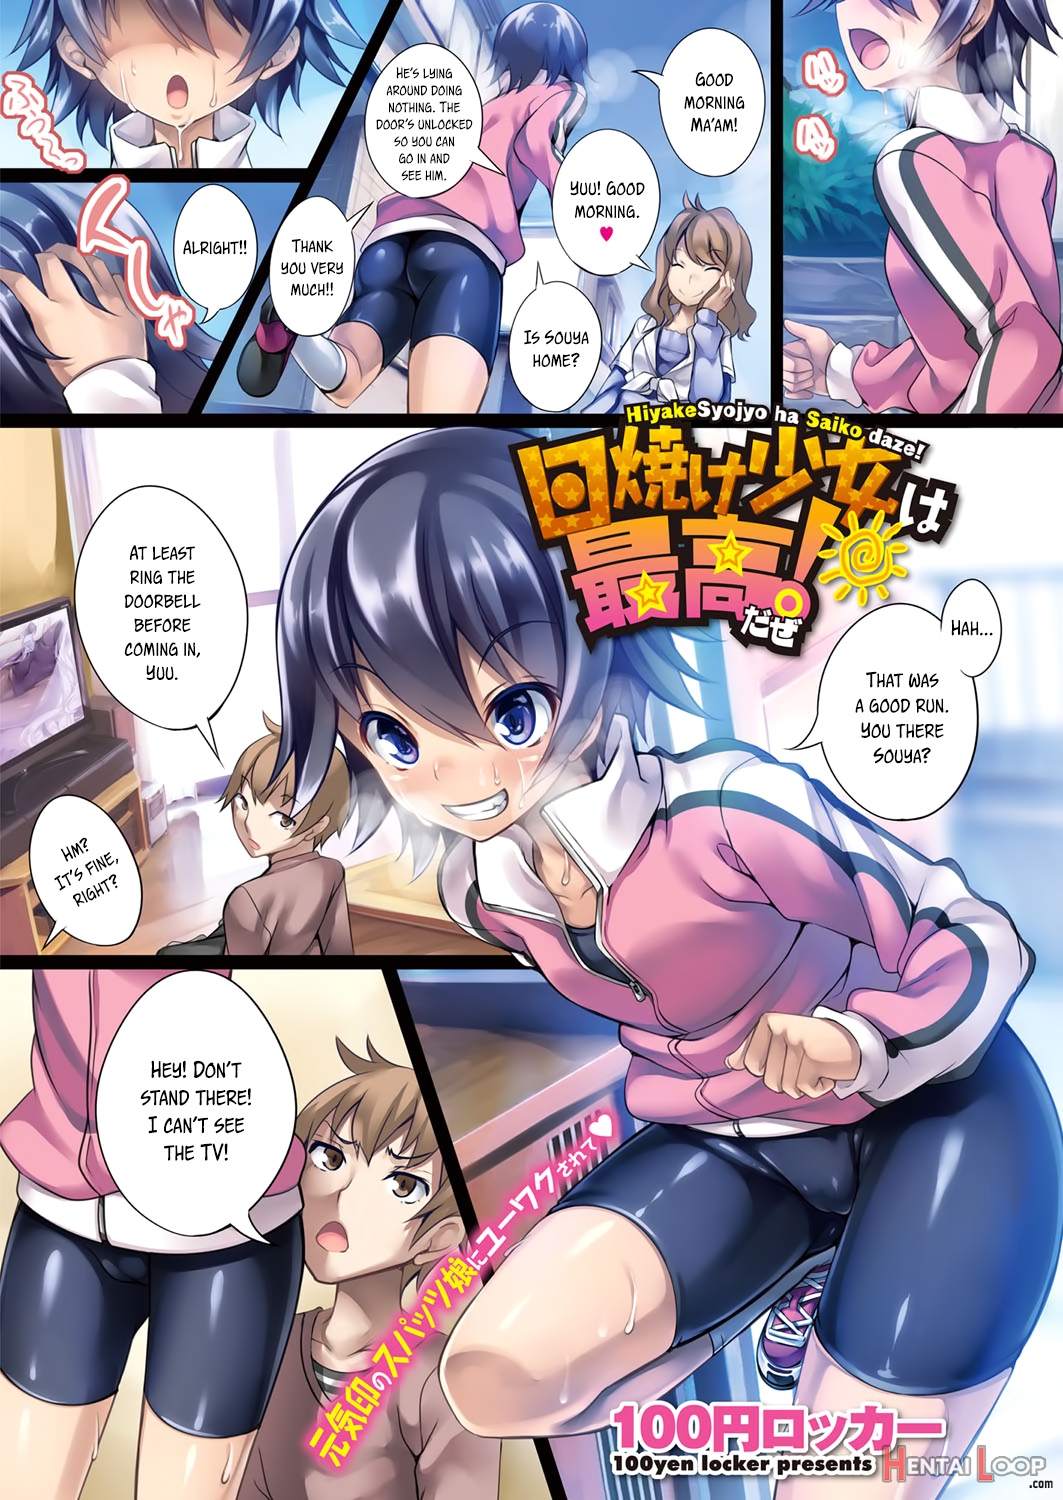 Tanned Girls Are The Best! (by 100Yen Locker) - Hentai doujinshi for free  at HentaiLoop